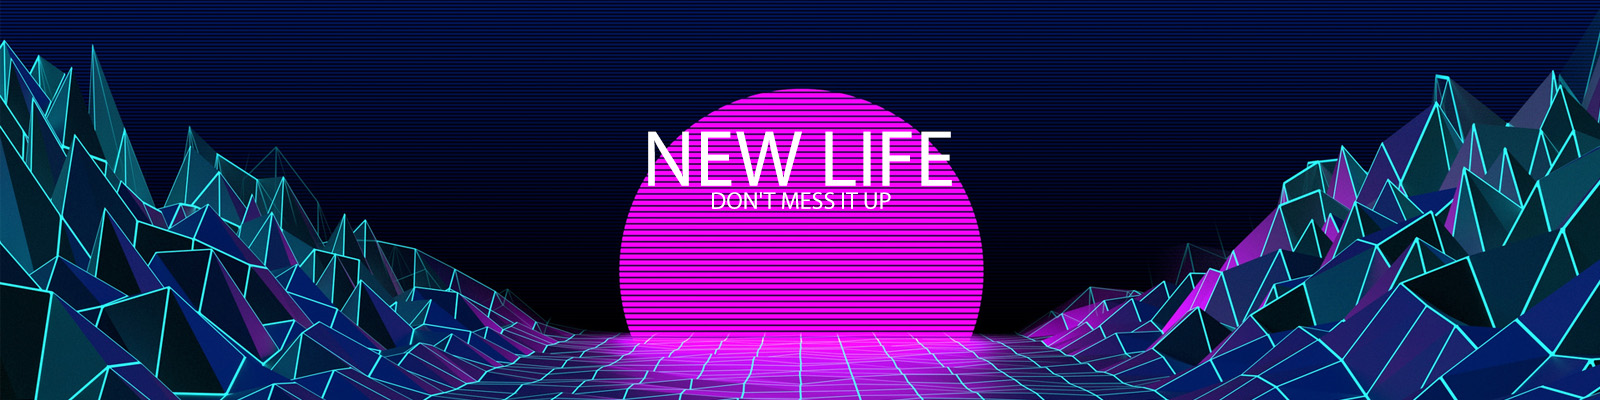 New Life - Don't Mess it Up Version 0.2.9 by Bpy